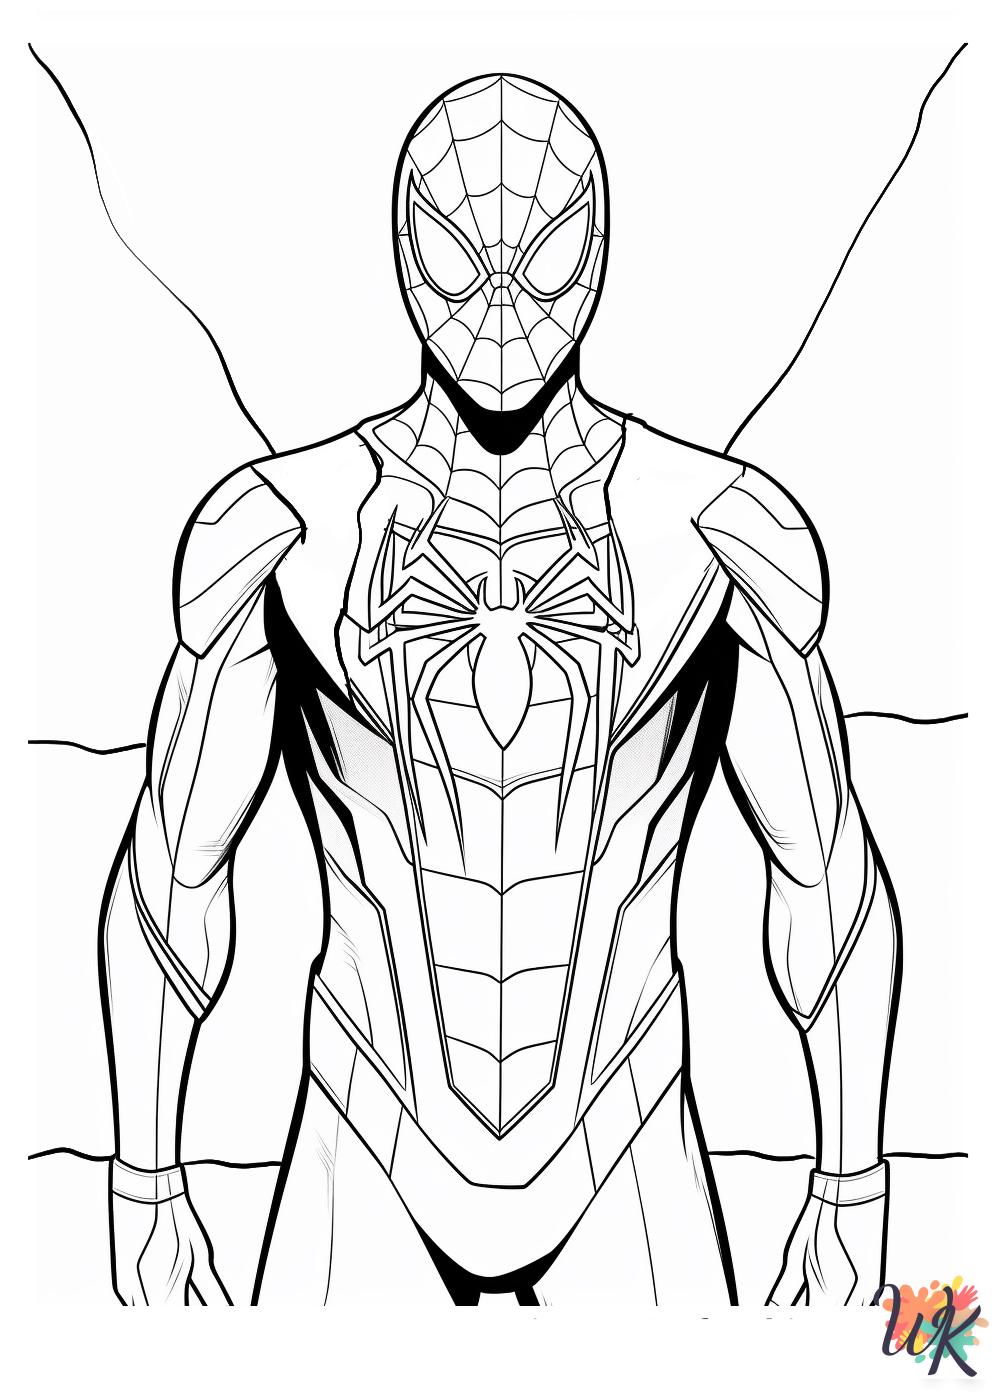 Miles Morales coloring pages to print